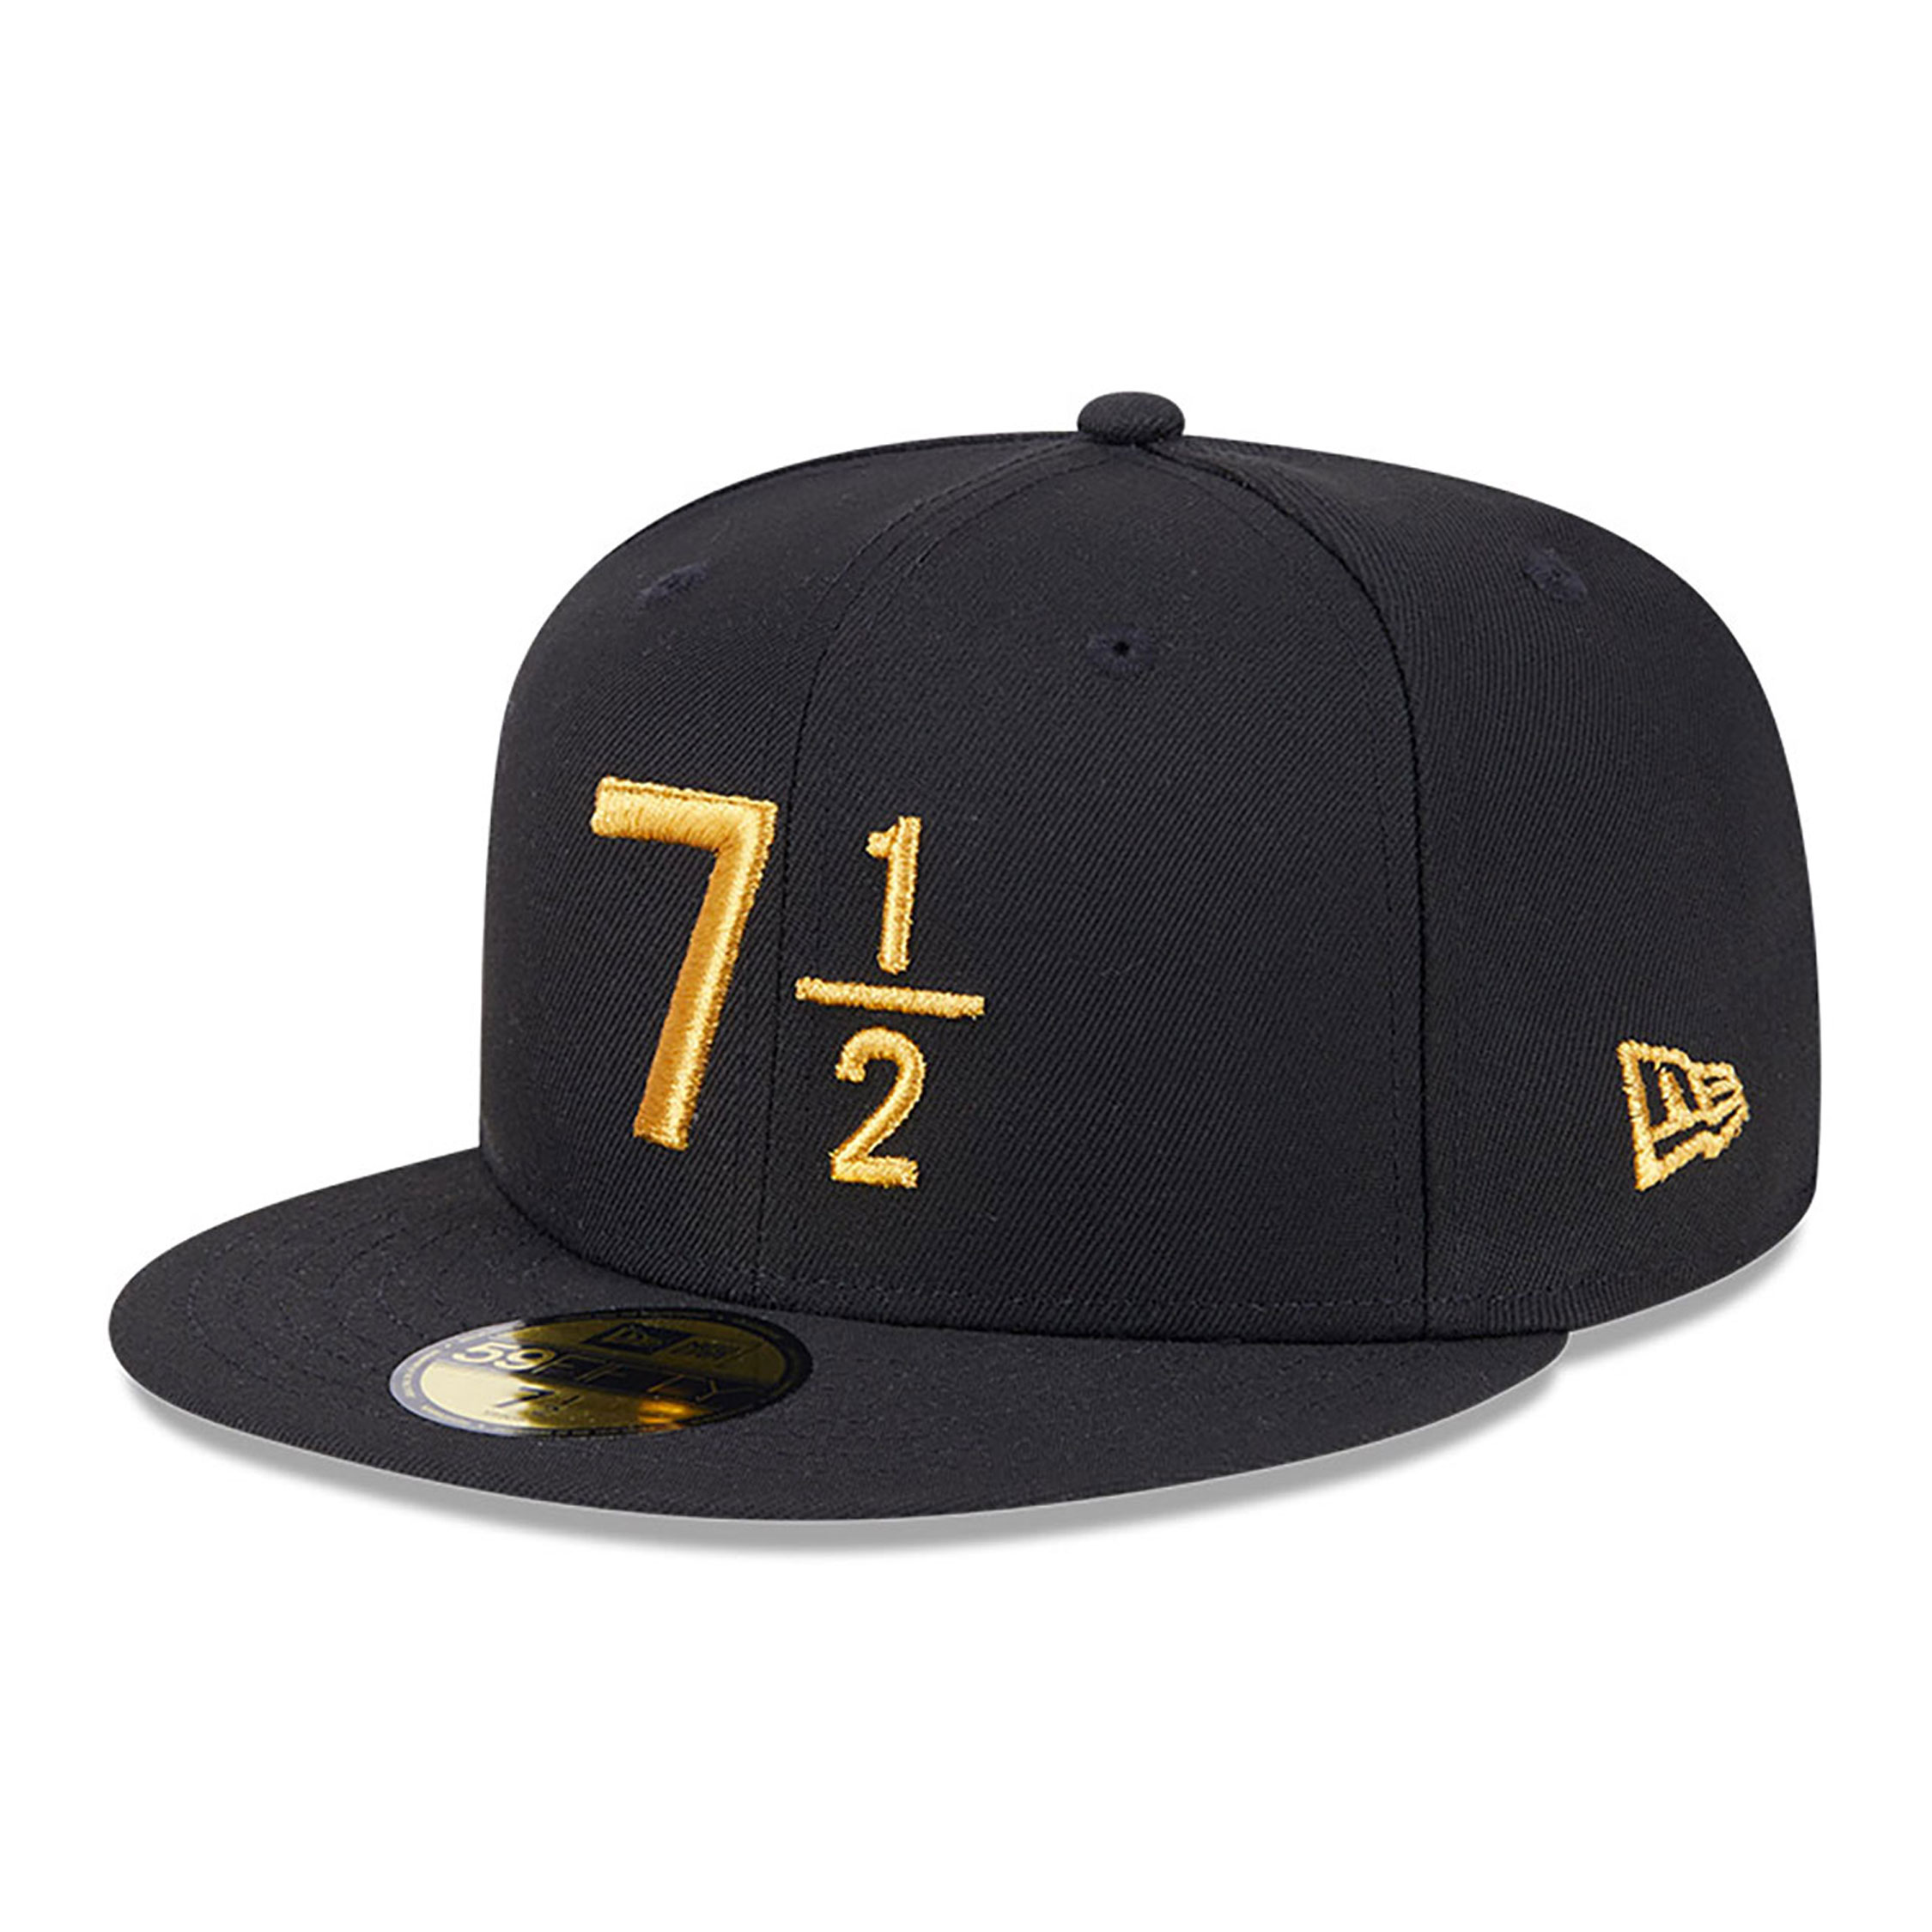 New Era 59FIFTY Day 7 1/2 Black 59FIFTY Fitted Cap